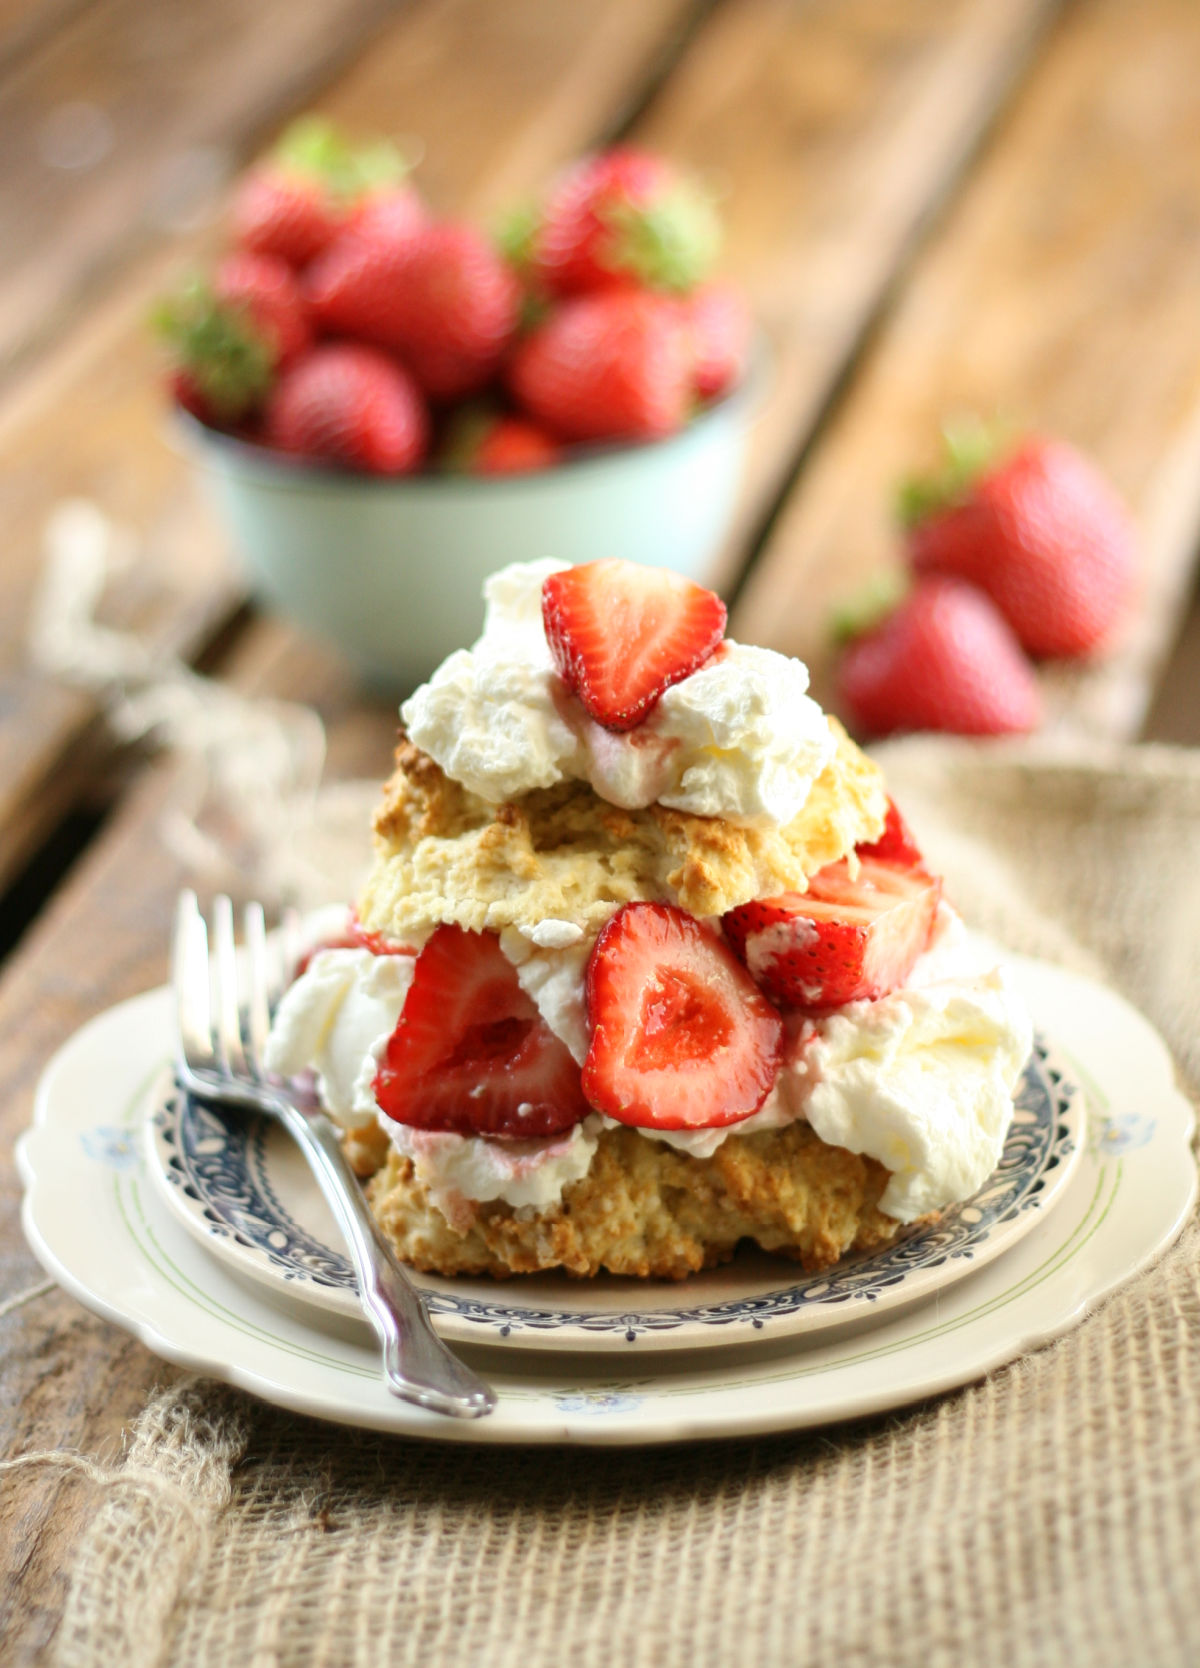 Shortcake biscuit cut in half with slices of strawberries and whipped cream on small white plate.